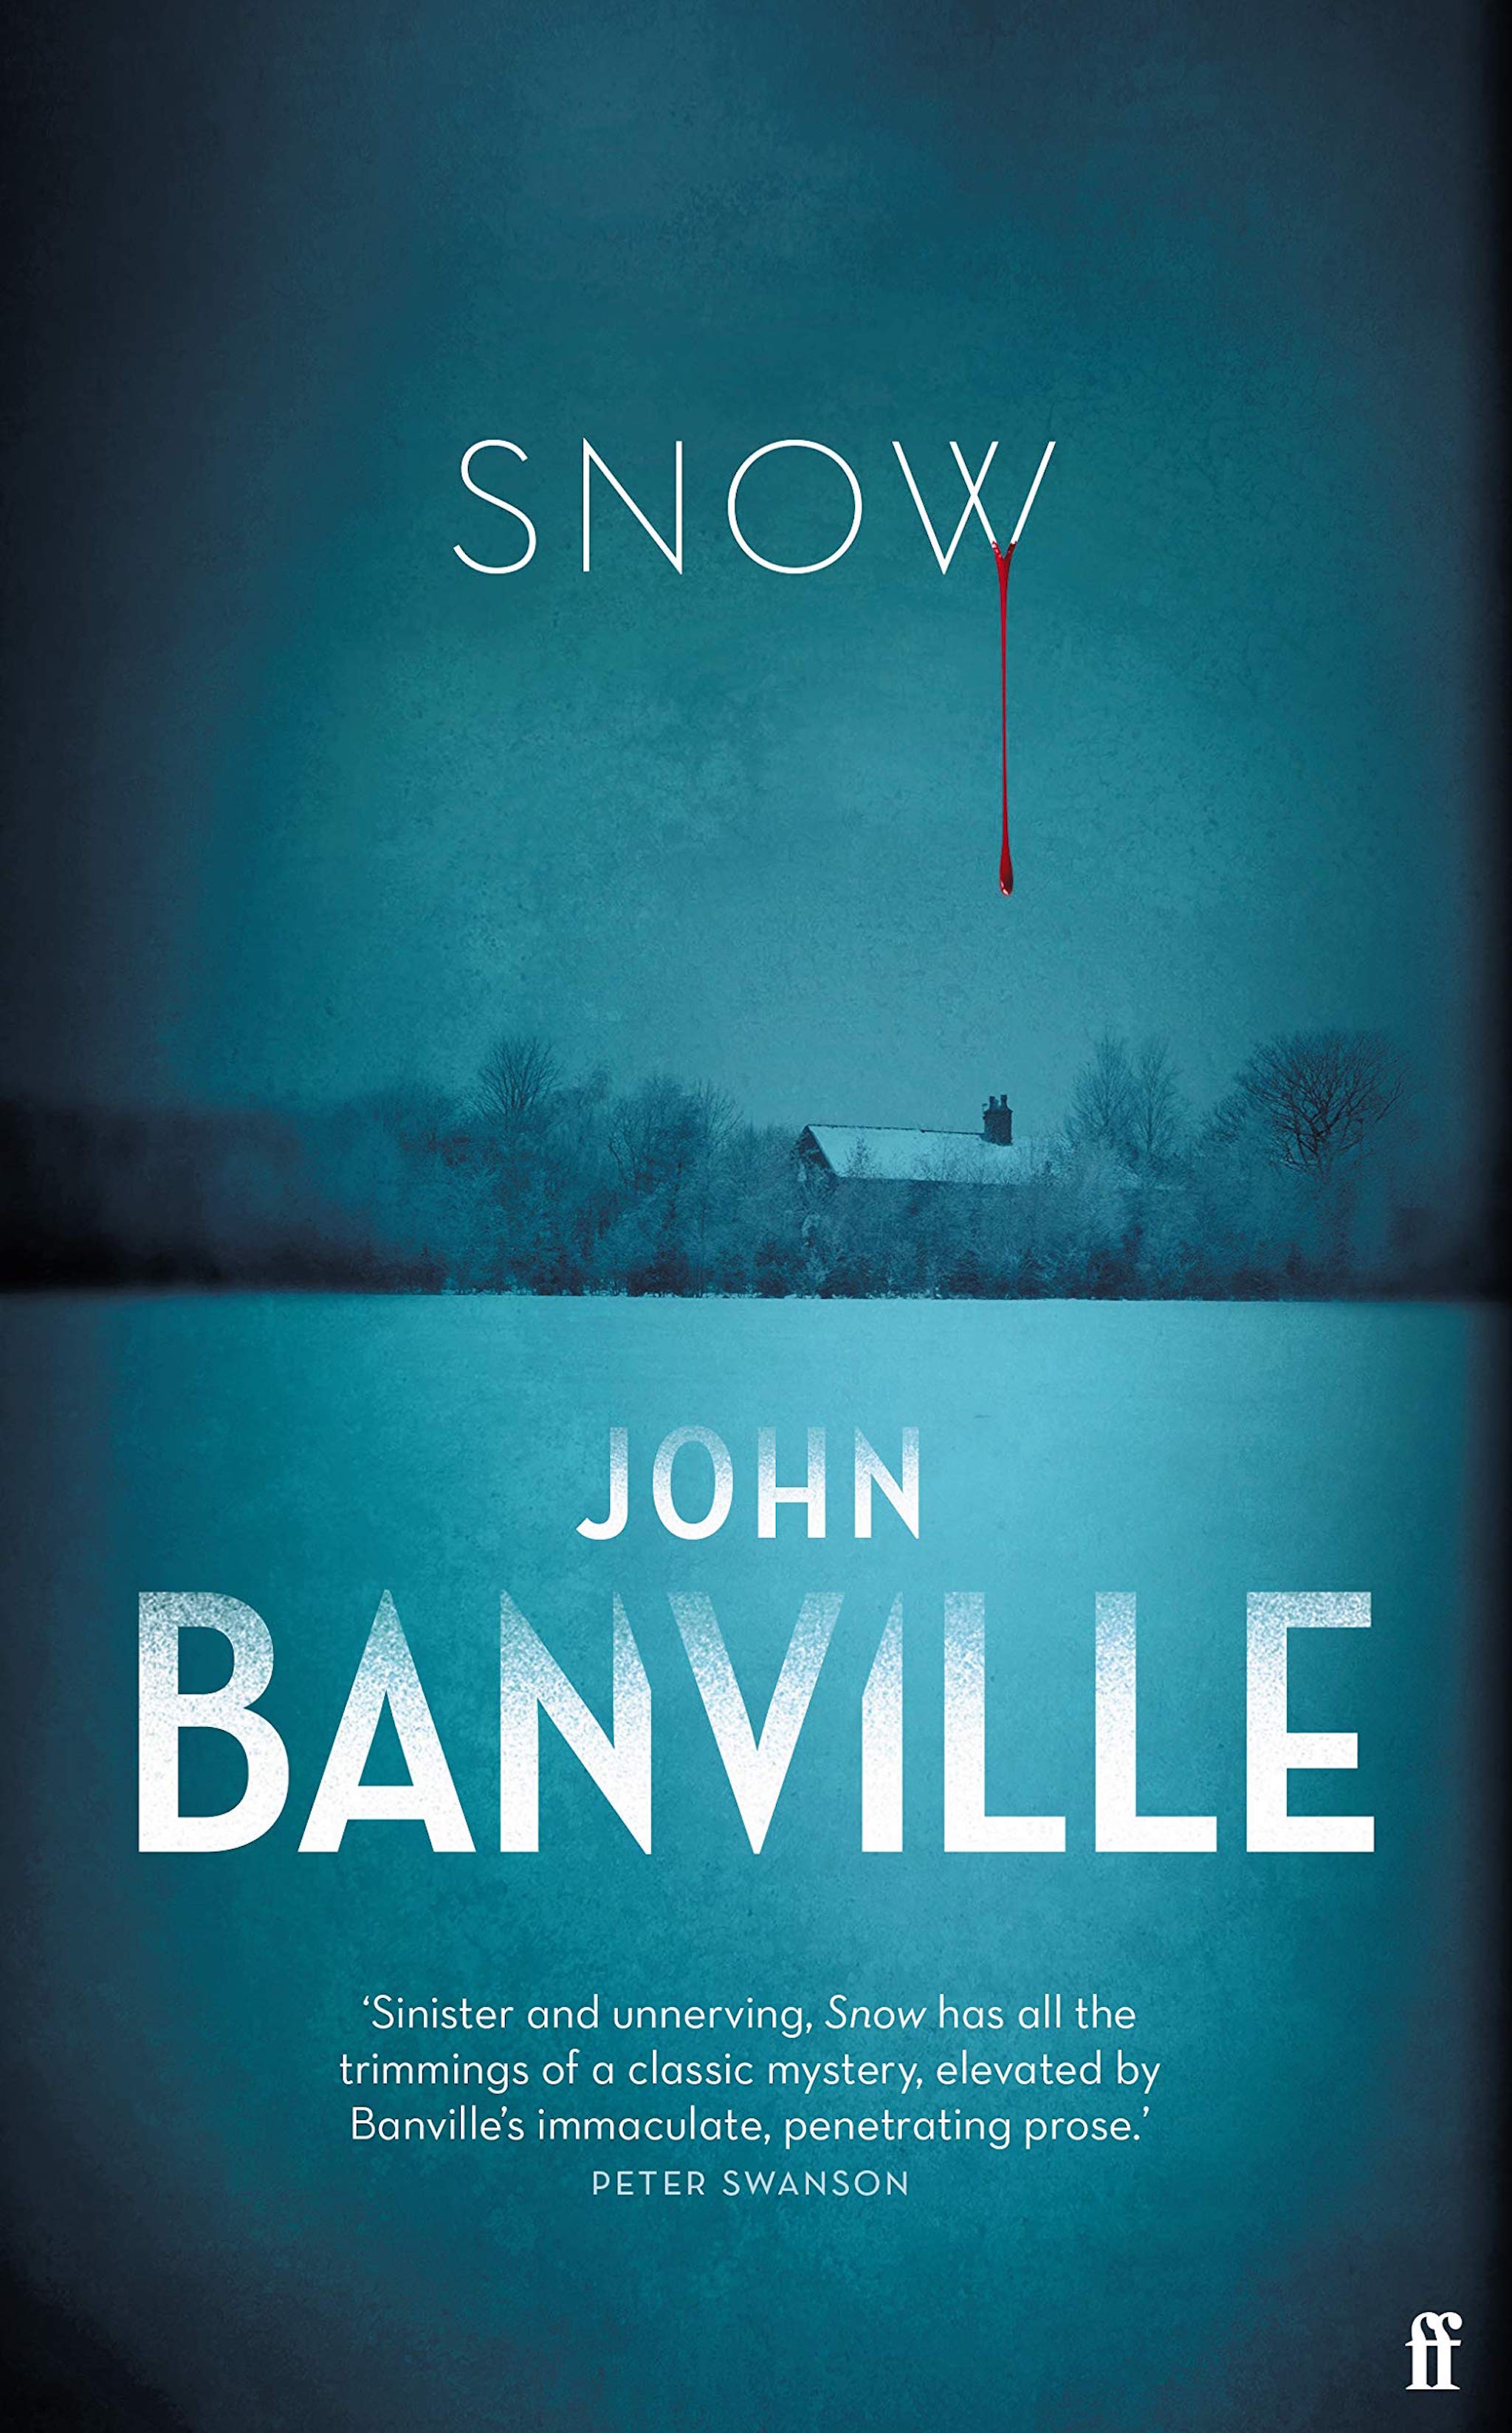 John Banville’s ‘Snow’ is a murder mystery set in an Irish country house in 1957